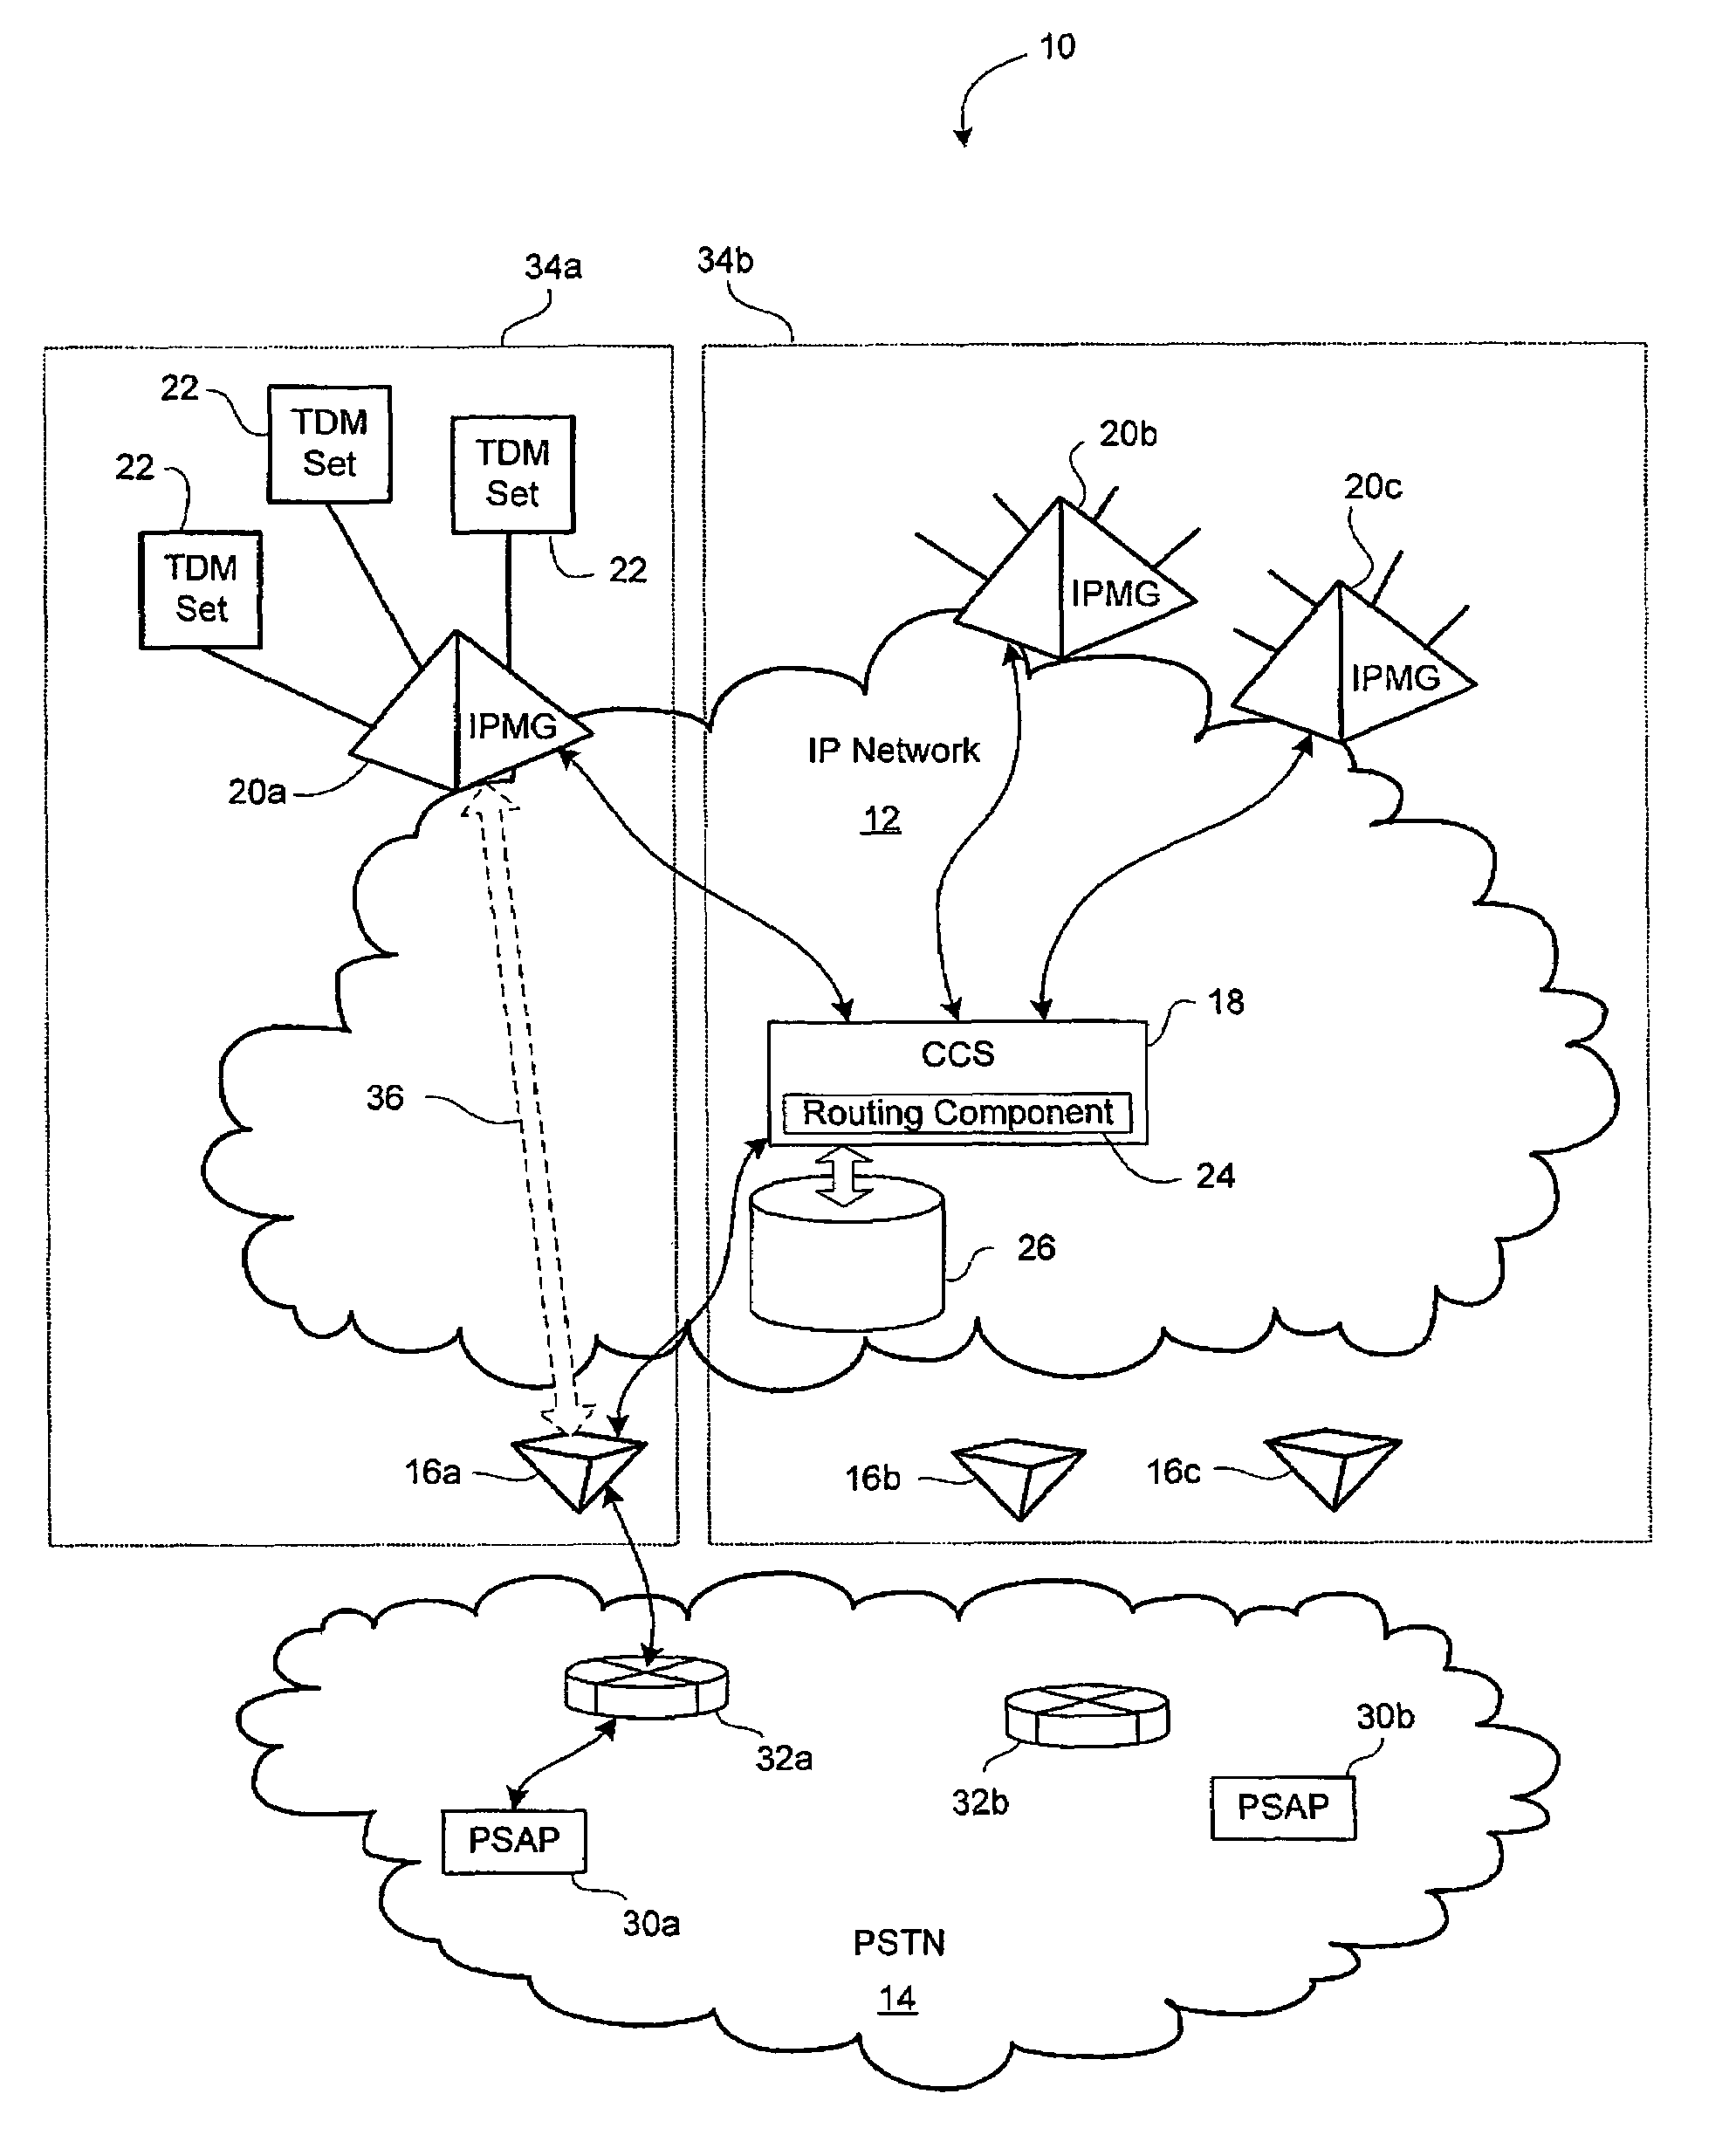 Localization of call routing for TDM sets in an IP network